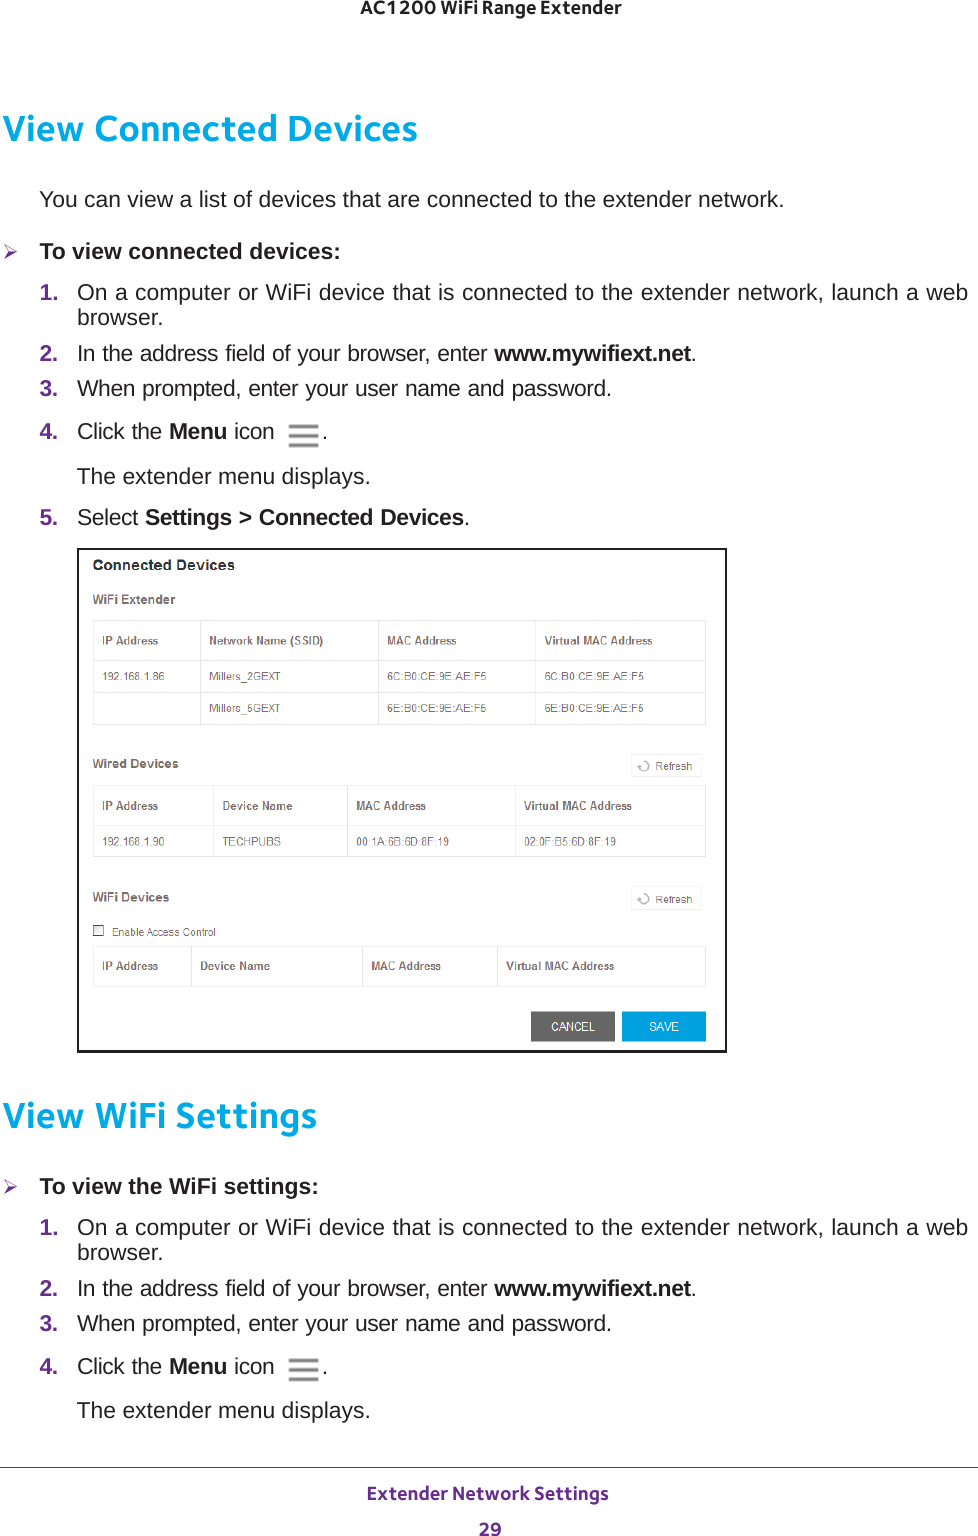 Extender Network Settings 29 AC1200 WiFi Range ExtenderView Connected DevicesYou can view a list of devices that are connected to the extender network.To view connected devices:1.  On a computer or WiFi device that is connected to the extender network, launch a web browser. 2.  In the address field of your browser, enter www.mywifiext.net. 3.  When prompted, enter your user name and password.4.  Click the Menu icon  .The extender menu displays.5.  Select Settings &gt; Connected Devices.View WiFi SettingsTo view the WiFi settings:1.  On a computer or WiFi device that is connected to the extender network, launch a web browser. 2.  In the address field of your browser, enter www.mywifiext.net. 3.  When prompted, enter your user name and password.4.  Click the Menu icon  .The extender menu displays.